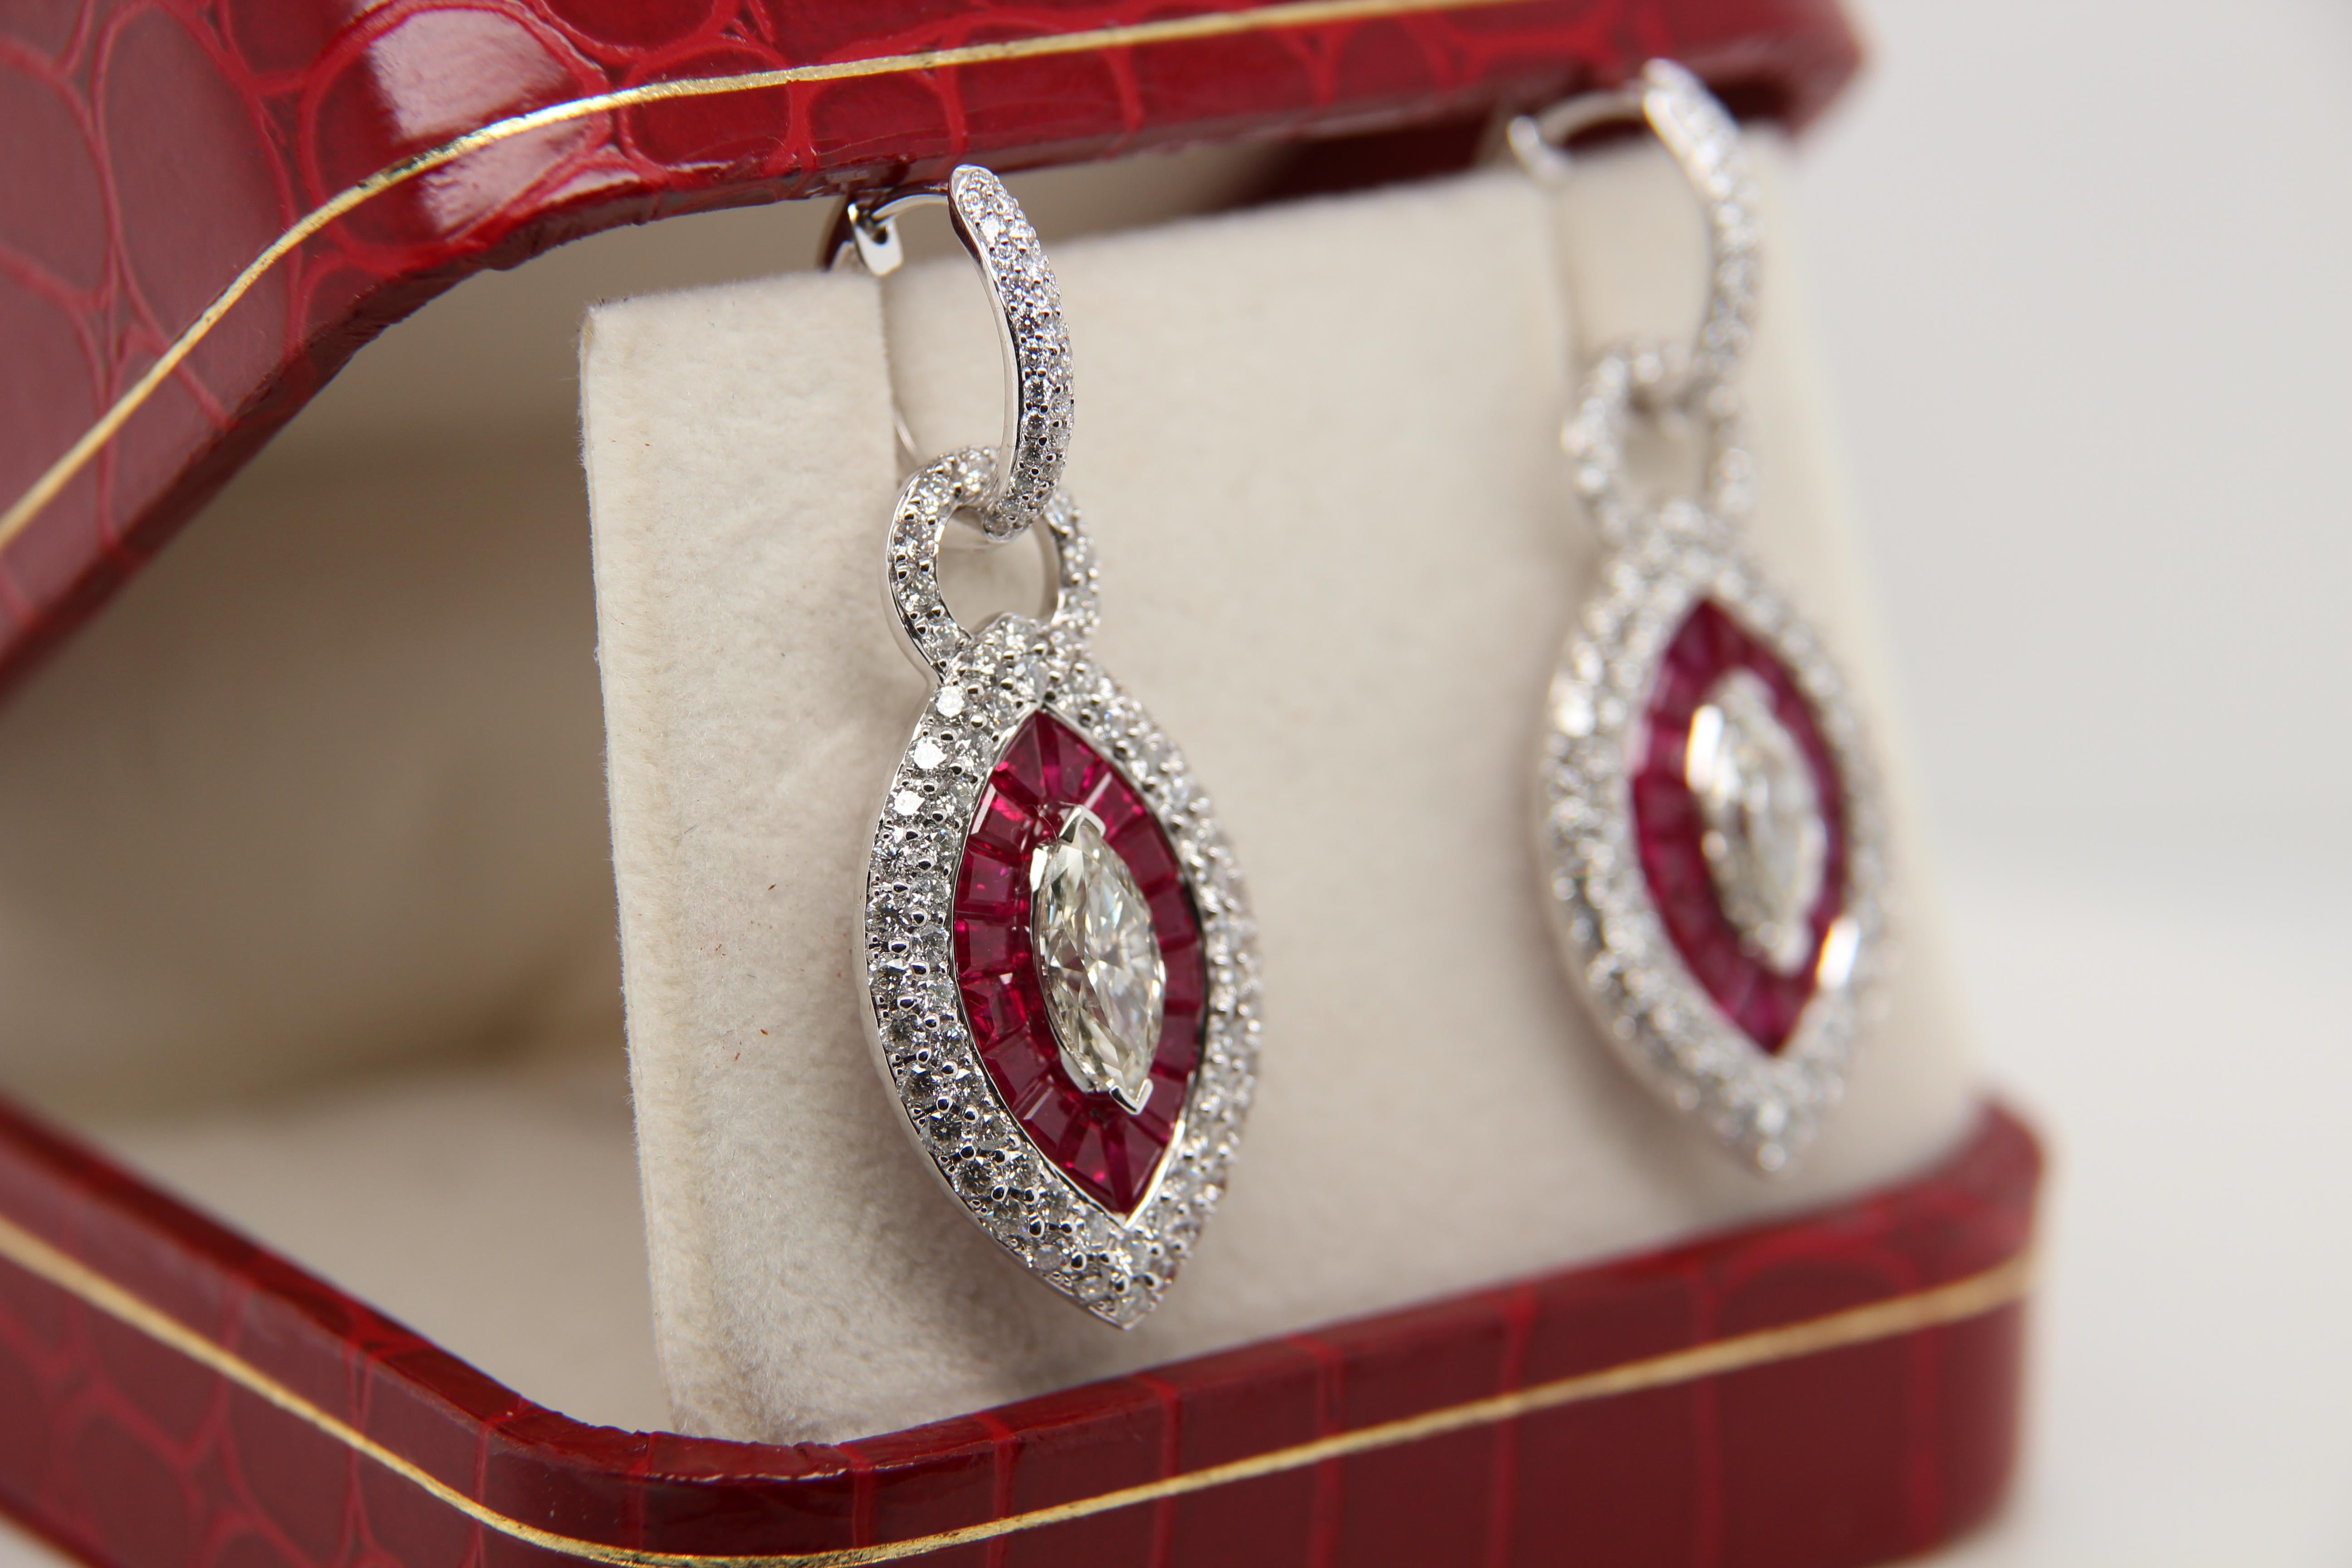 A diamond and ruby earring. The center marquise diamond pair weighs 1.96 carat totally and surrounded by 3.30 carat rubies and 2.49 carat diamonds. It is made in 18 karat white gold 12.76 g gross weight.